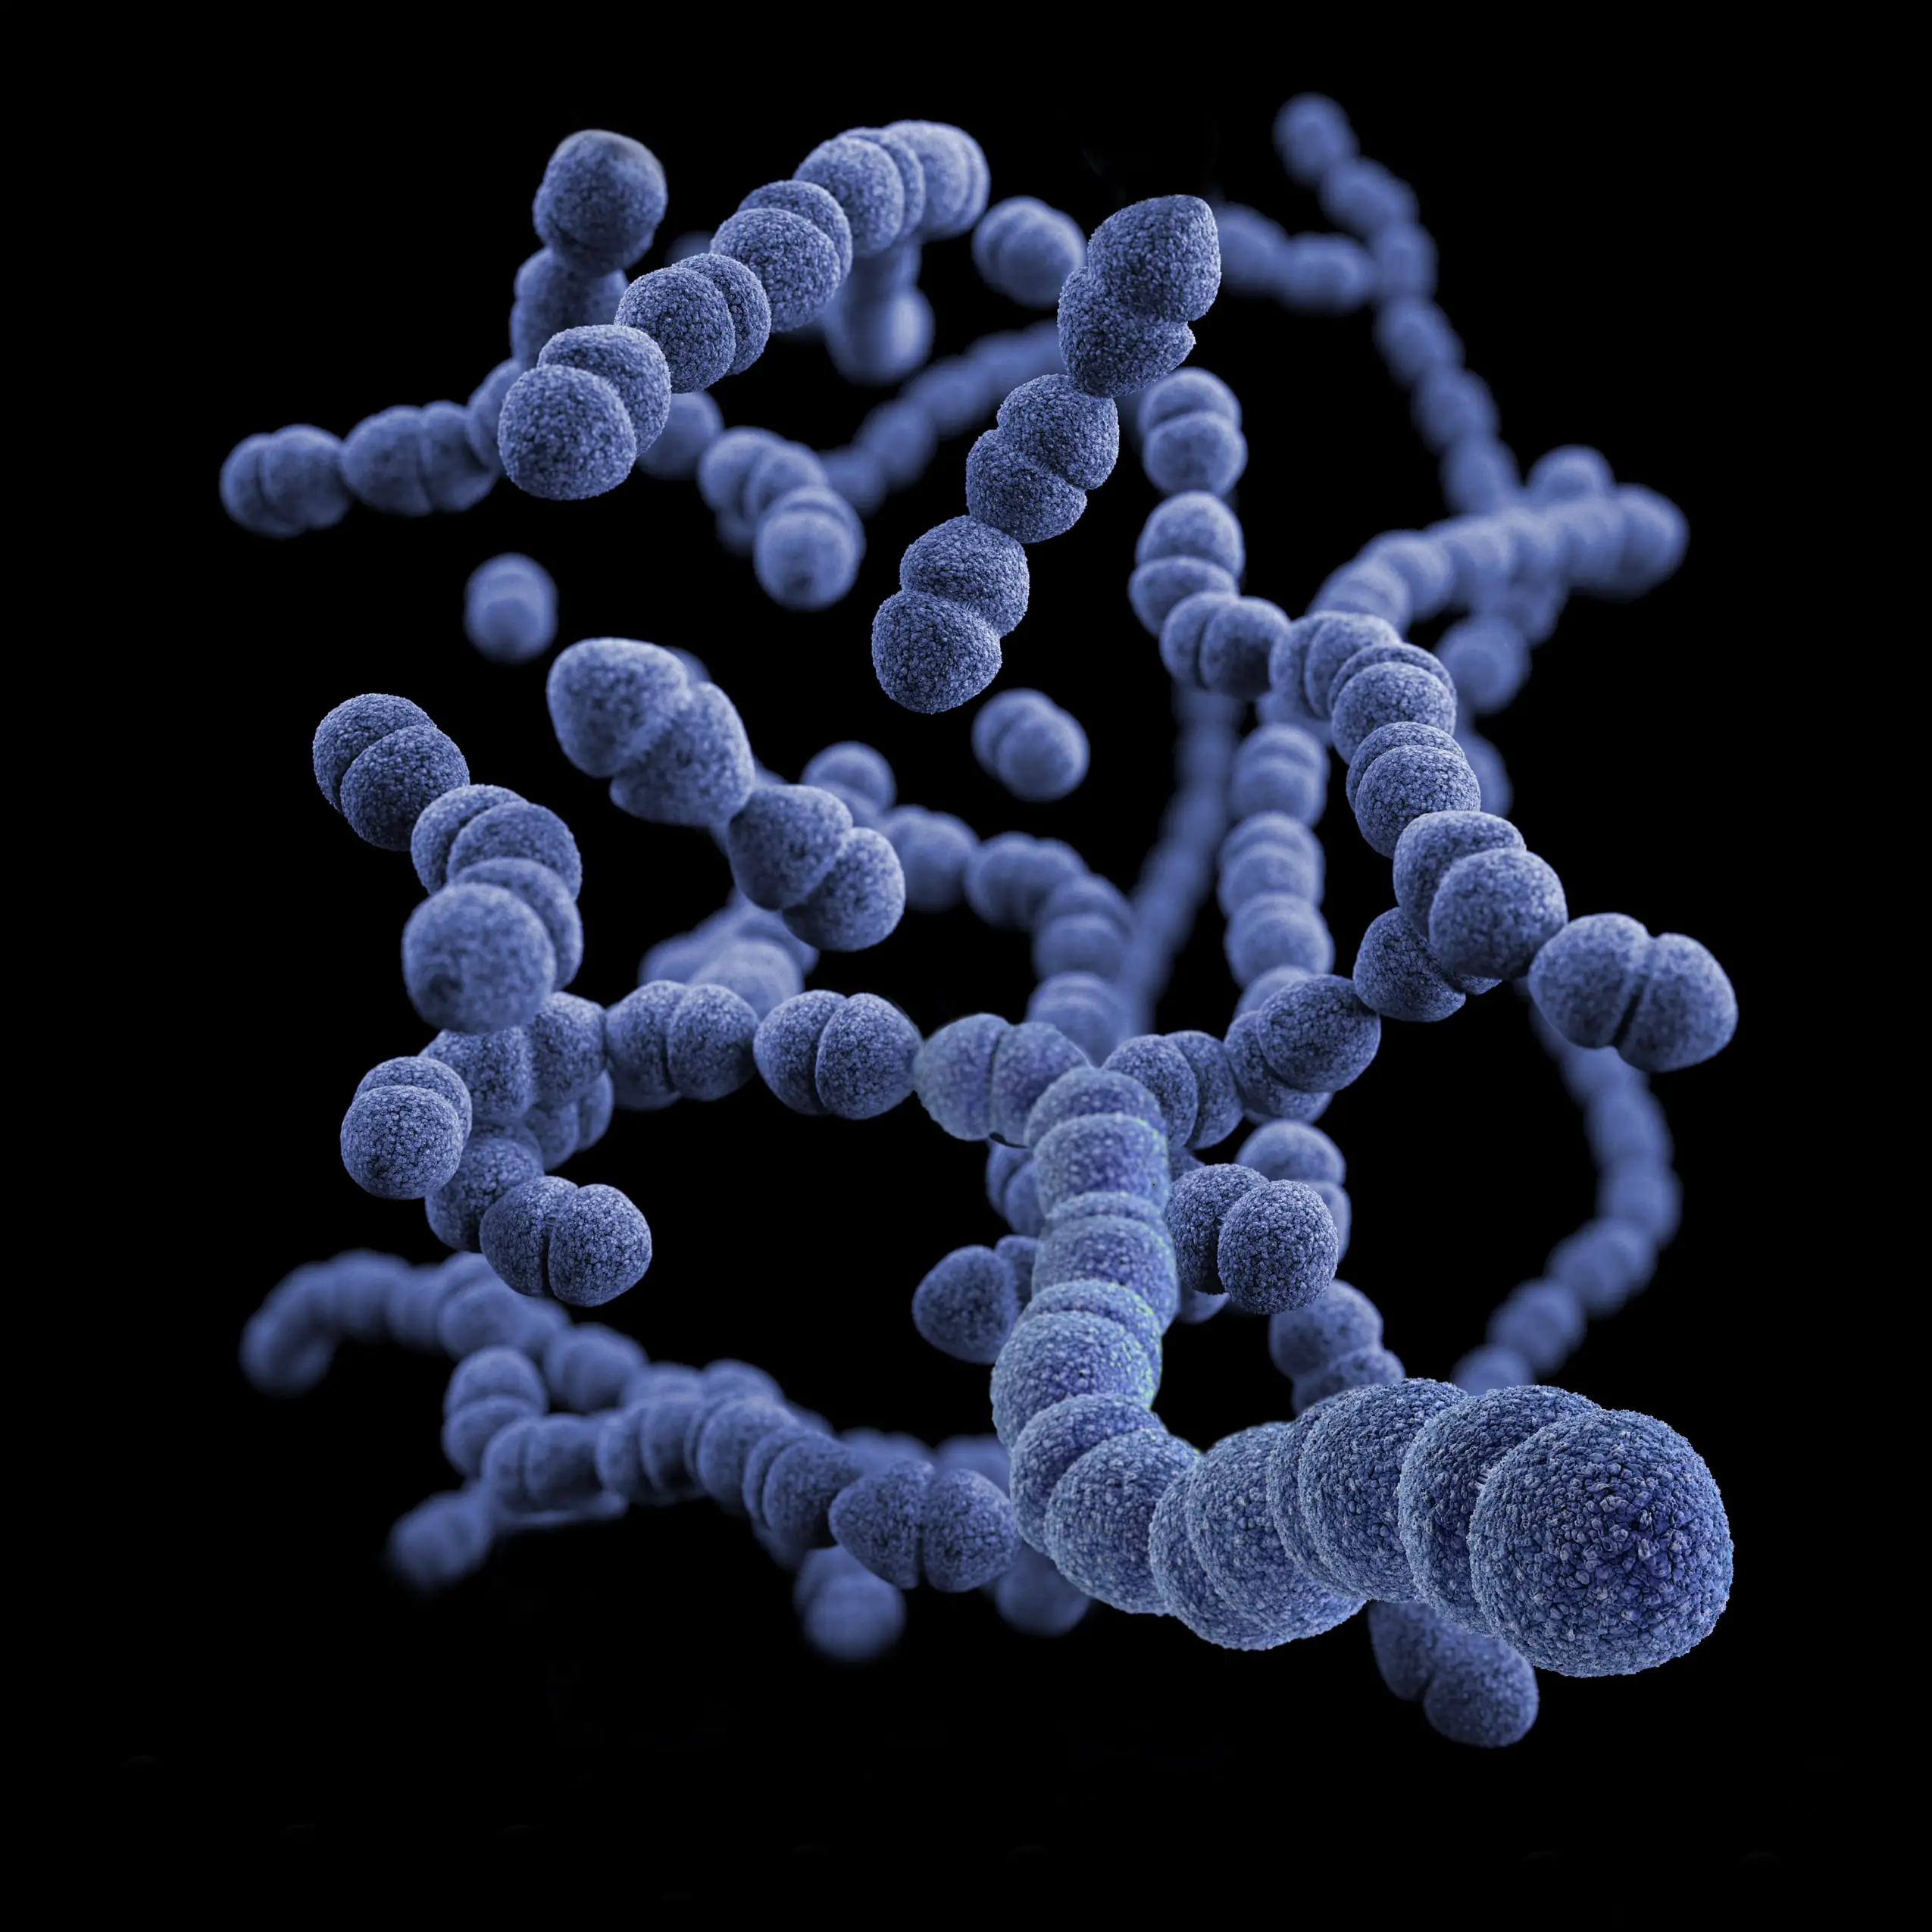 Bacteria Photo by CDC on Unsplash